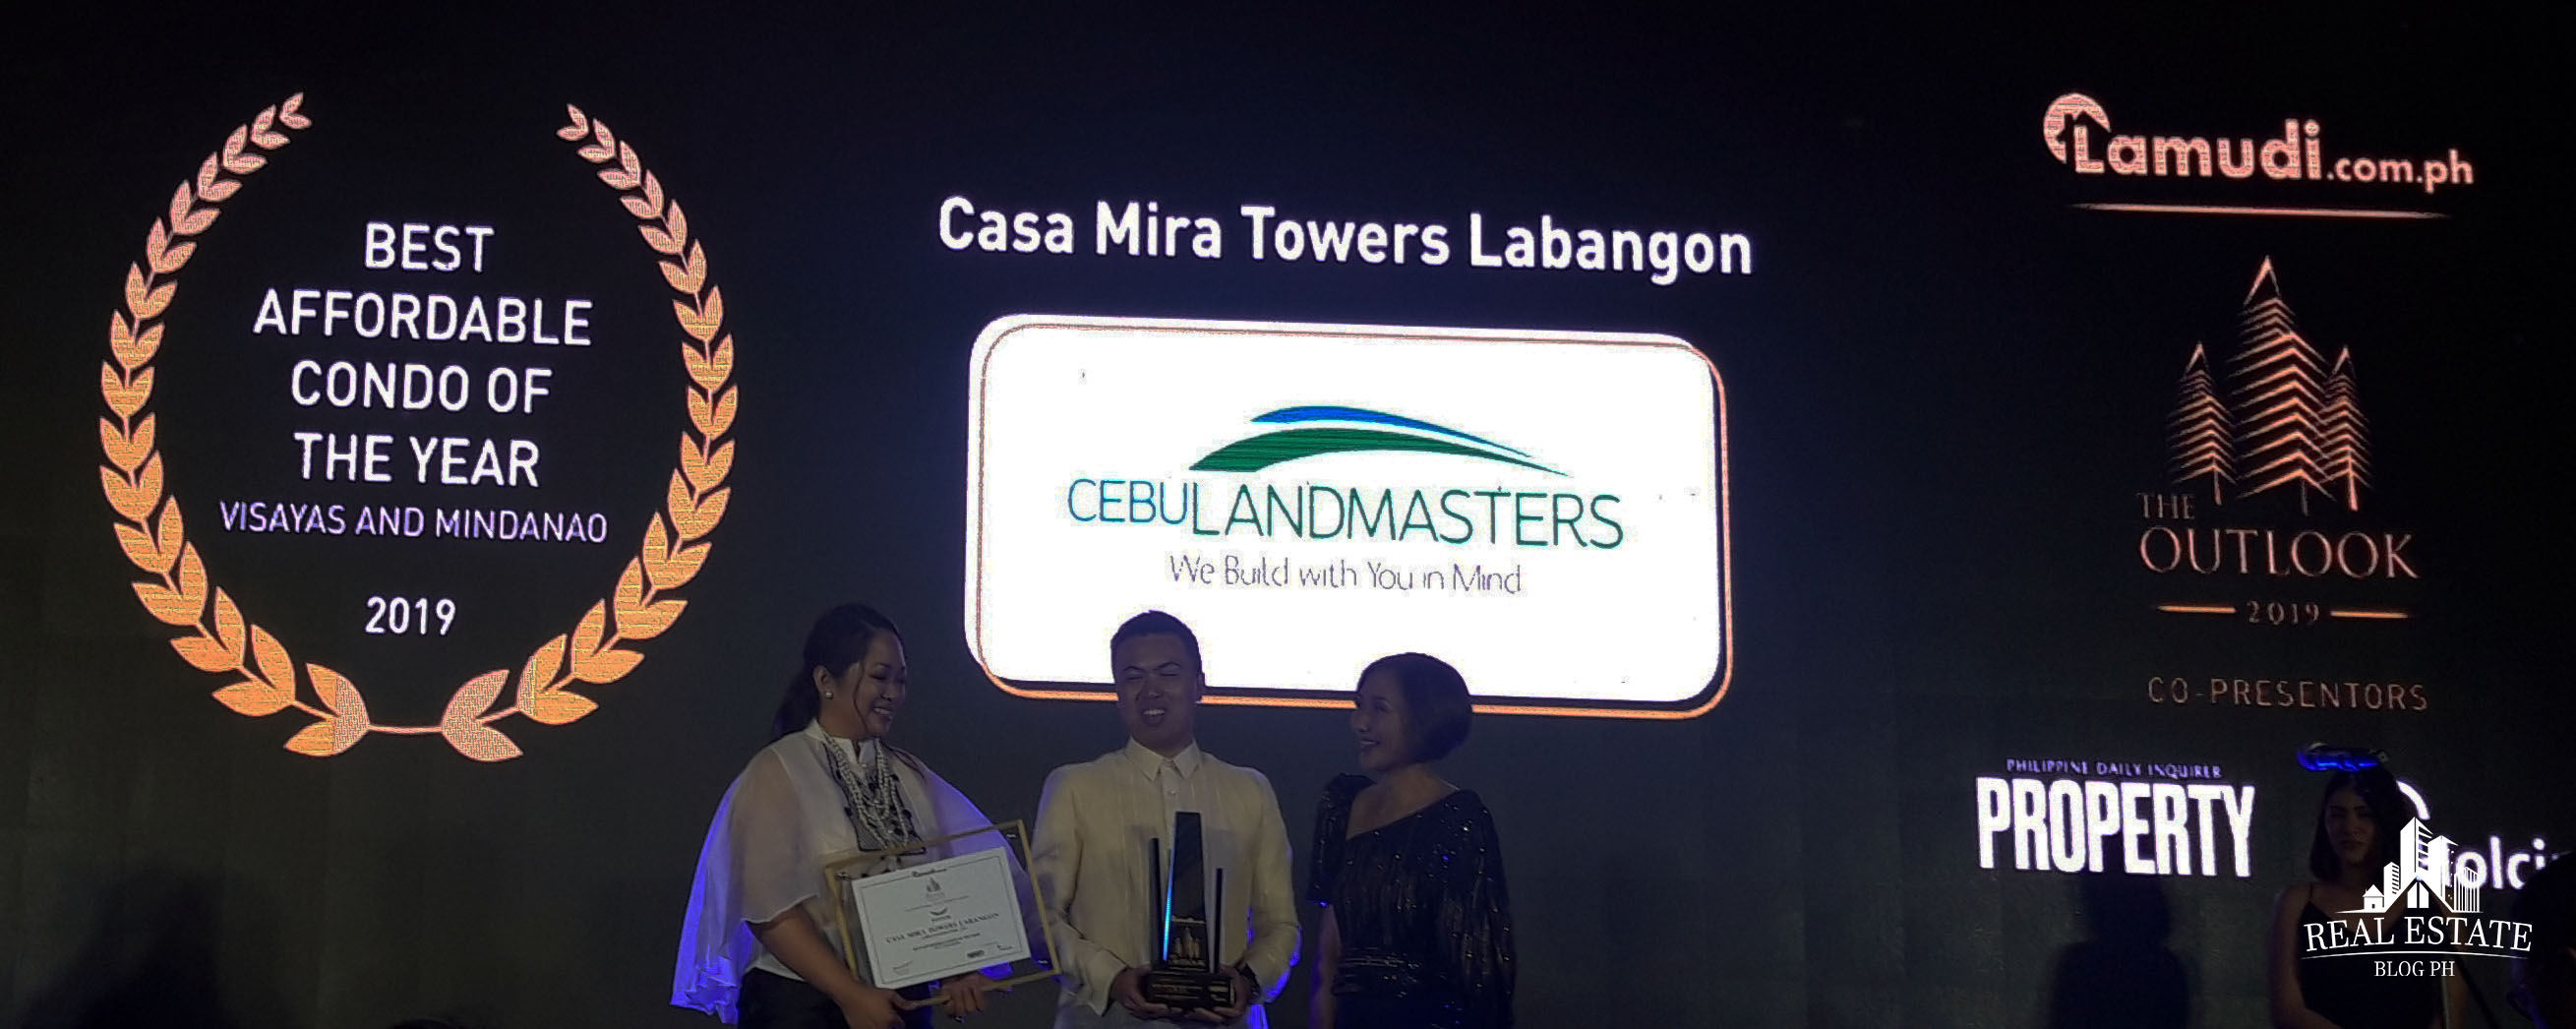 1 Best Affordable Condo of the Year Visayas and Mindanao.jpg